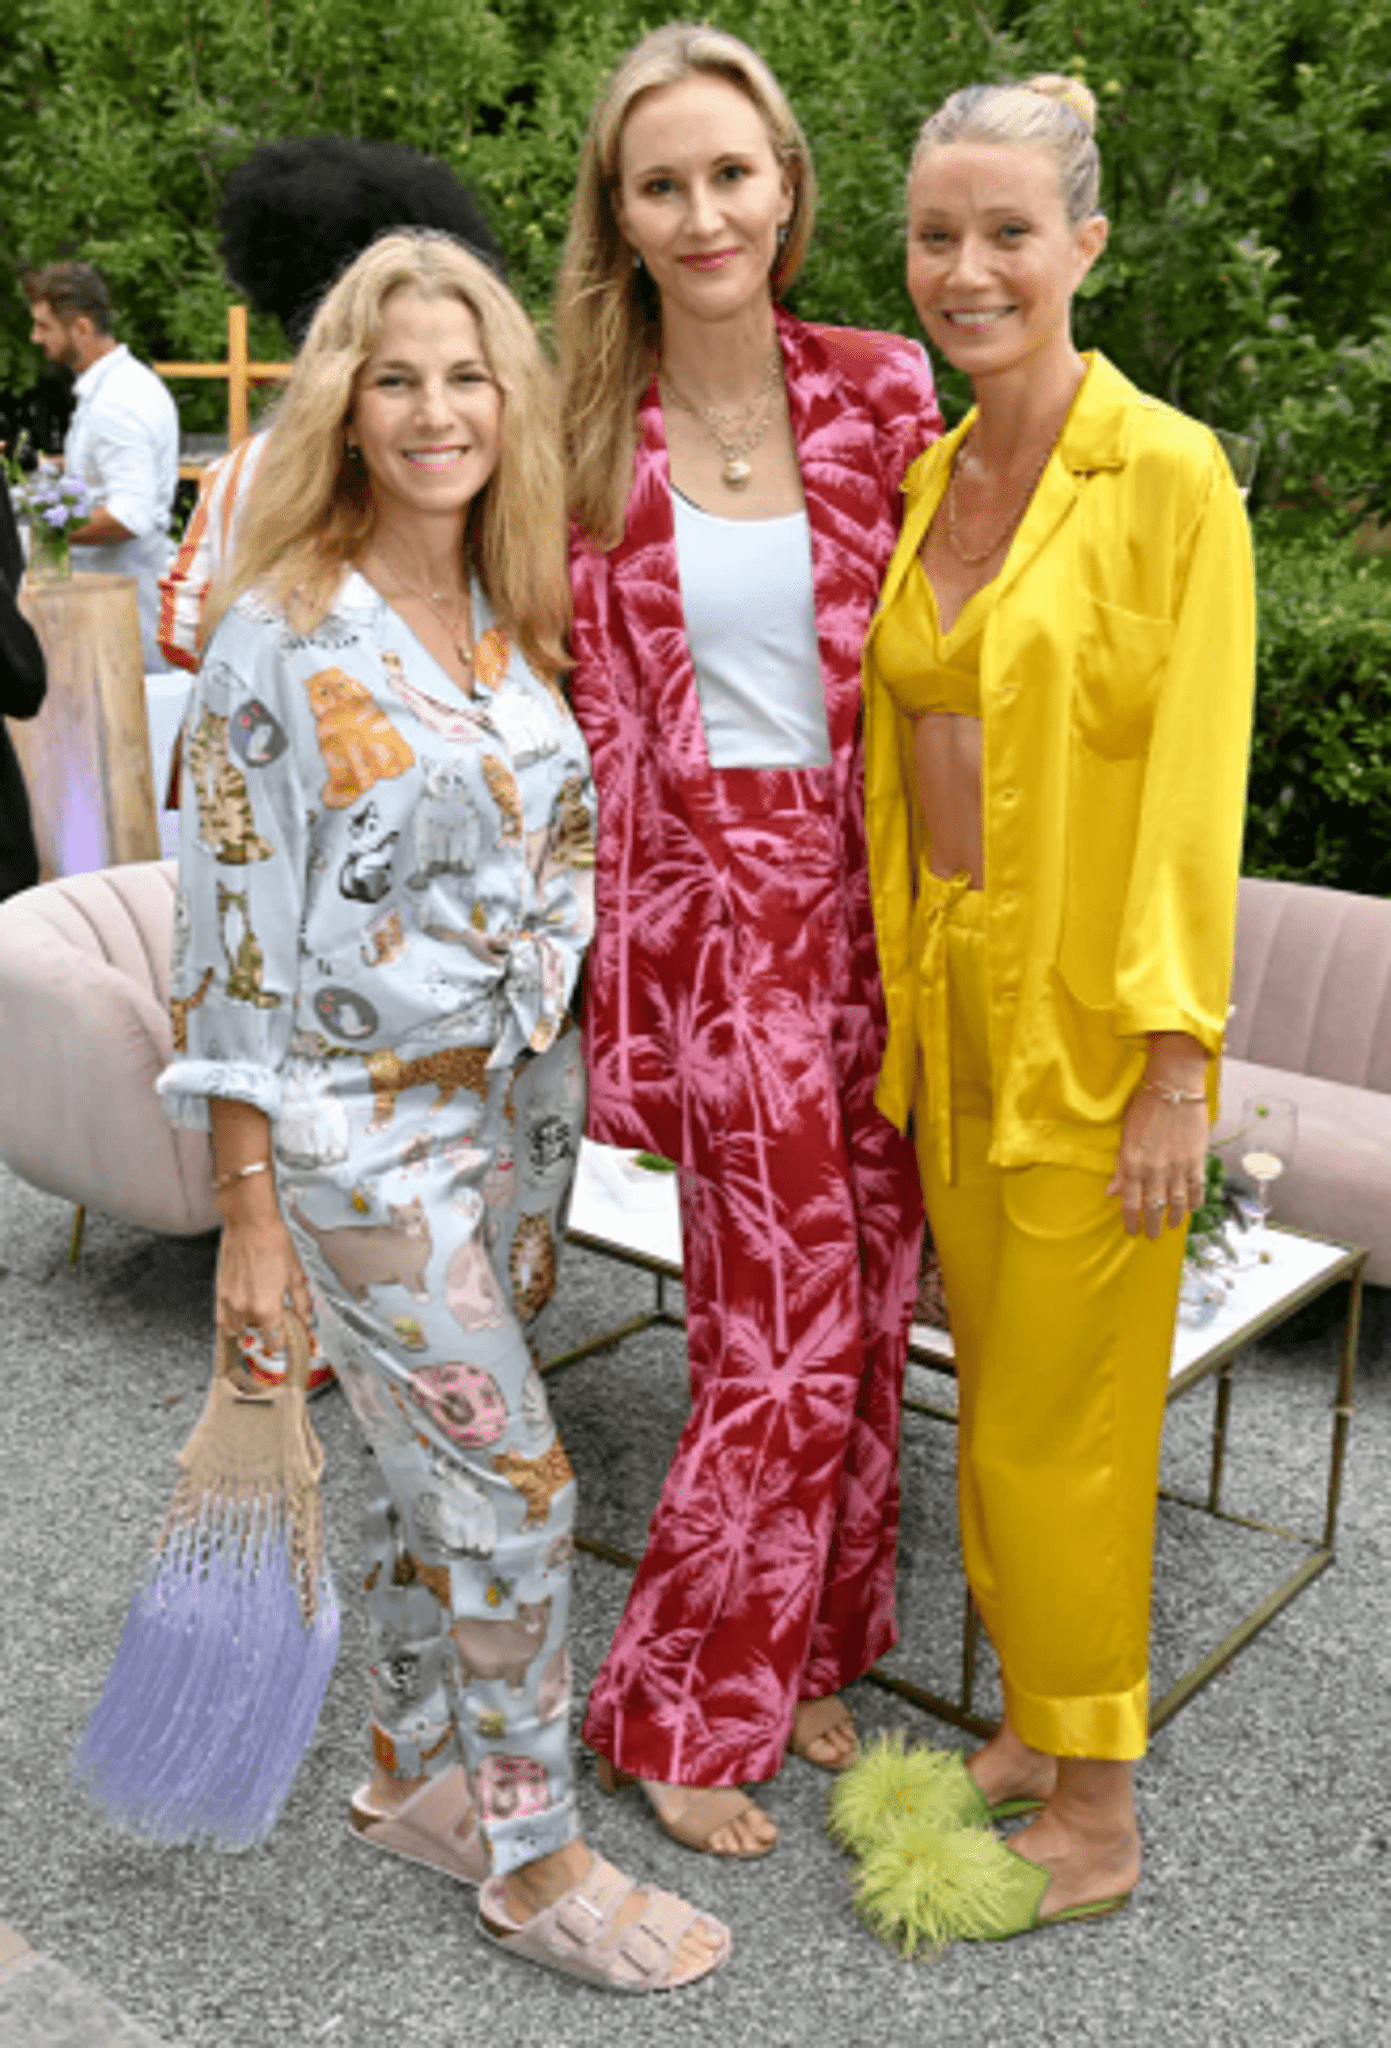 Gwyneth Paltrow Showed Up For A Social Event In Silk Pajamas And Just Minimum Makeup